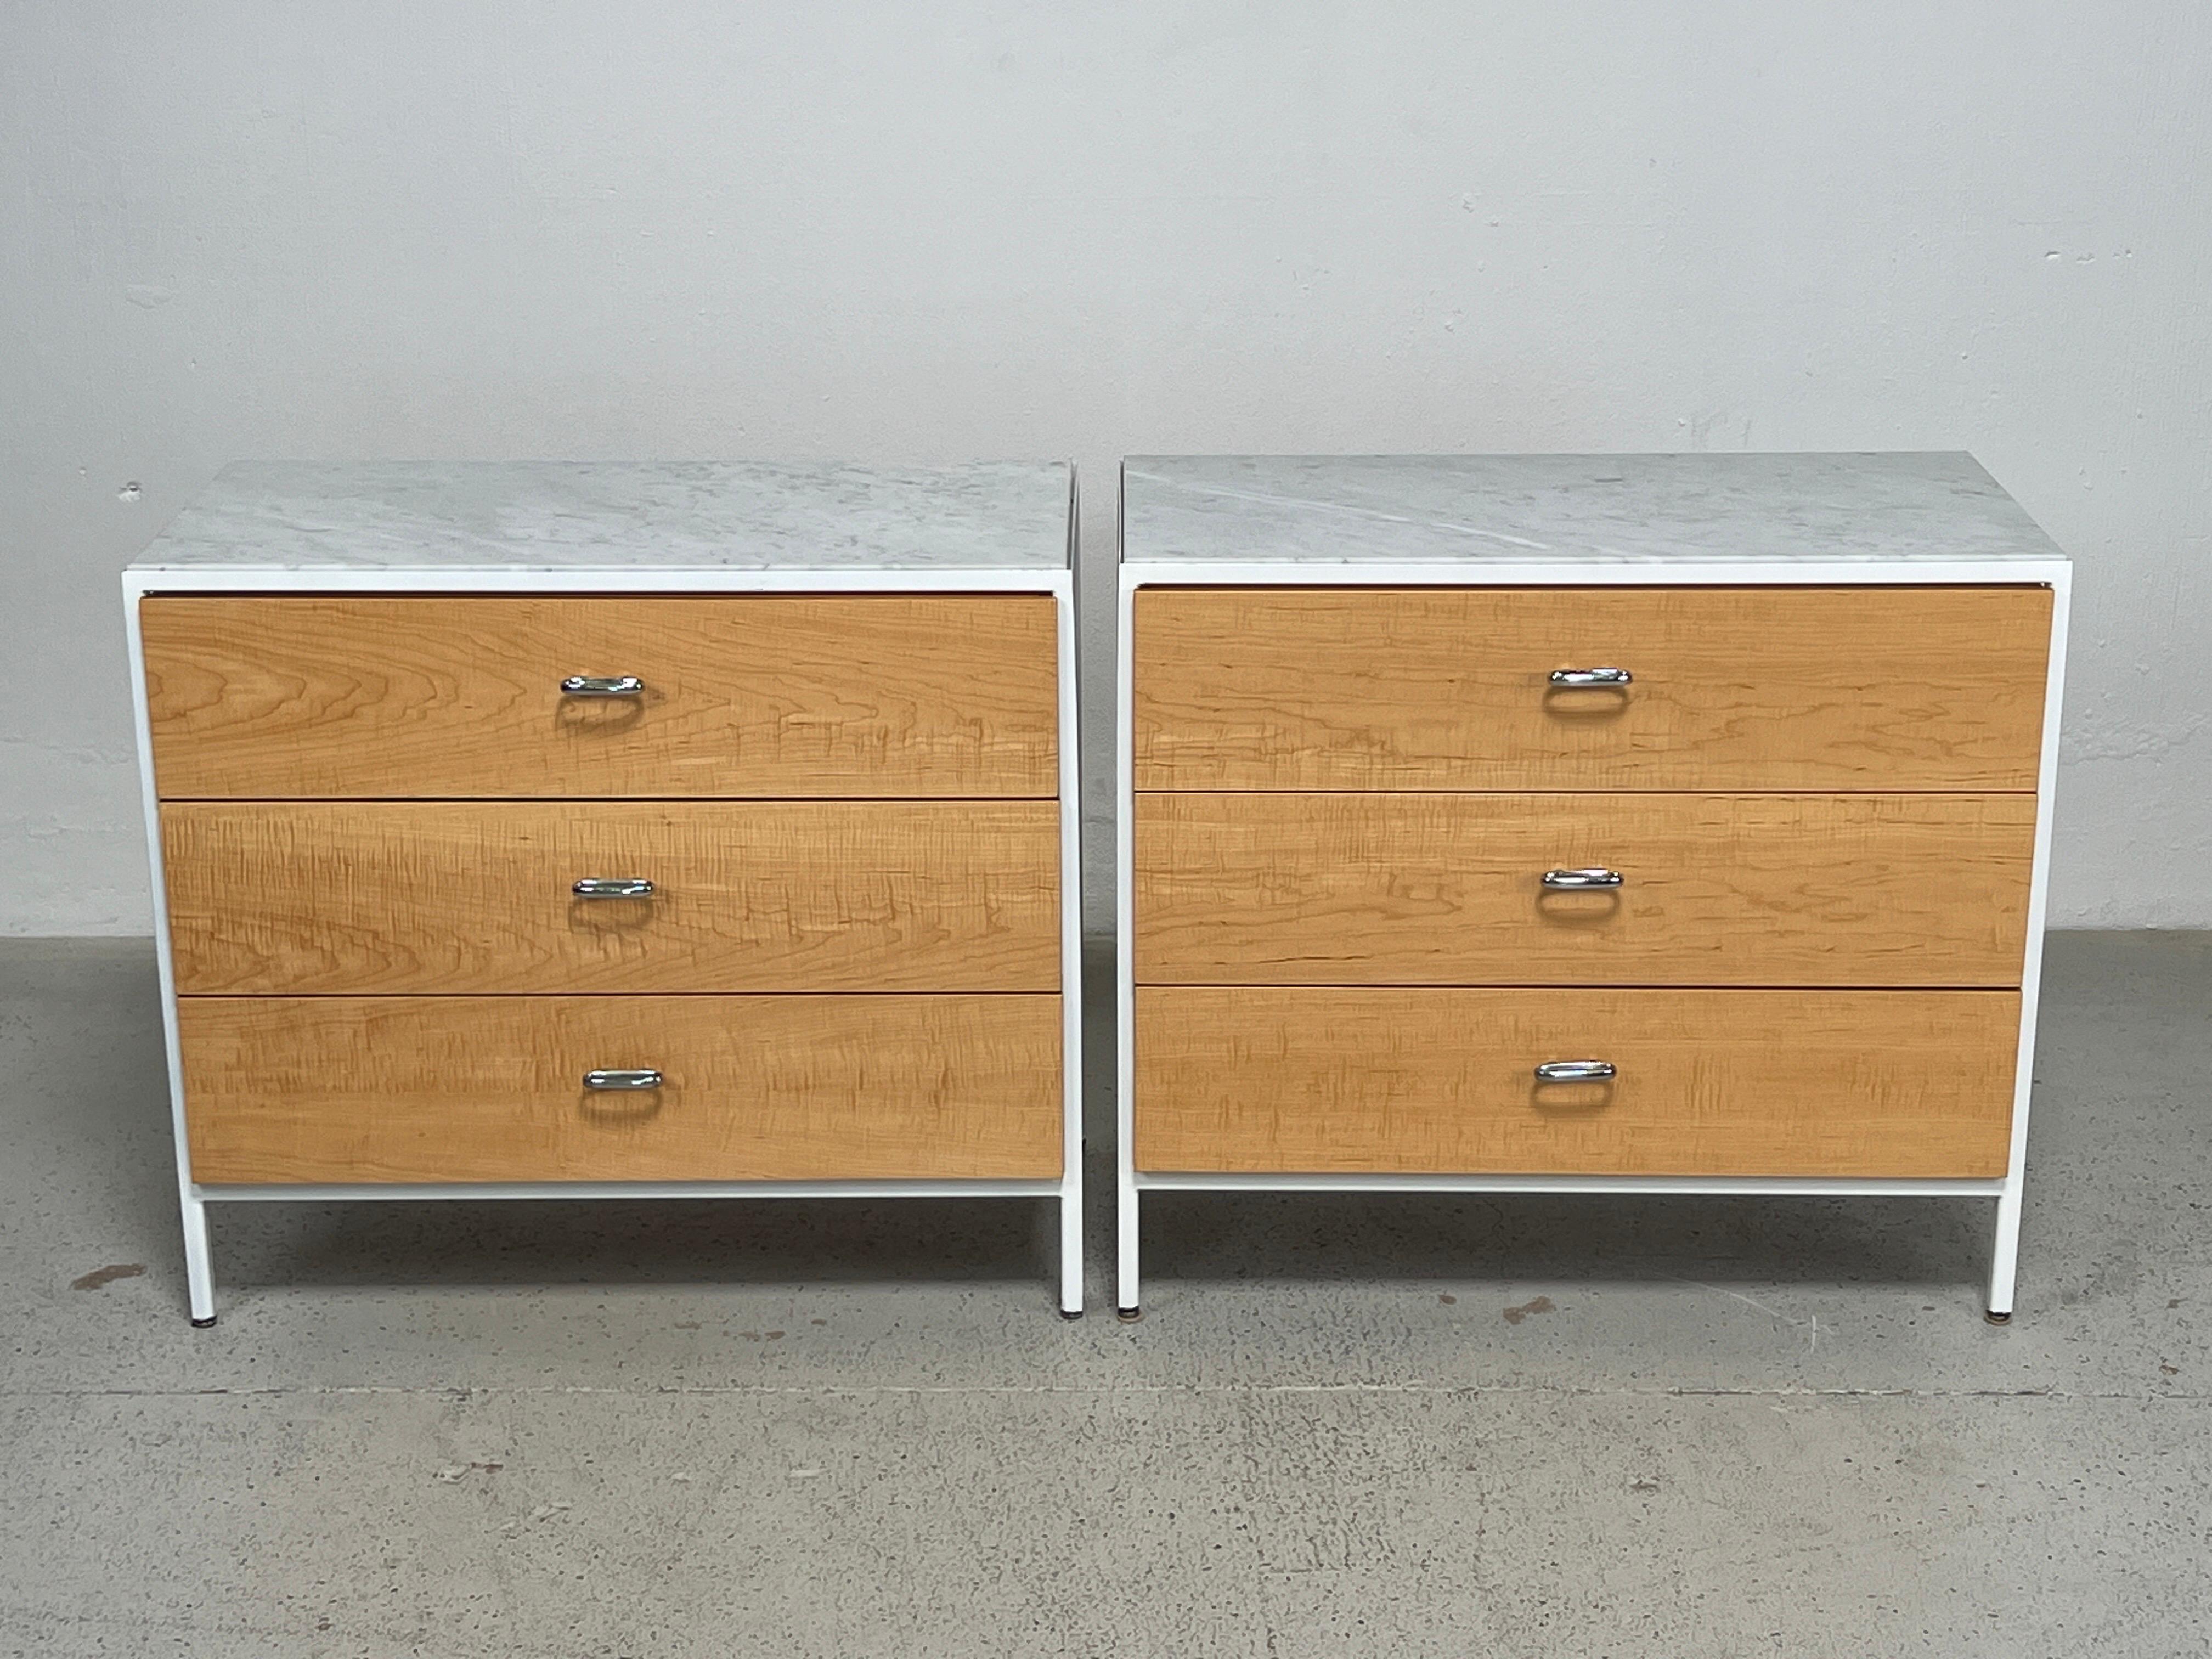 A beautiful pair of steel frame cabinets designed by George Nelson for Herman Miller. All cabinets restored with maple drawer fronts and marble tops. Third matching cabinet available separately. 